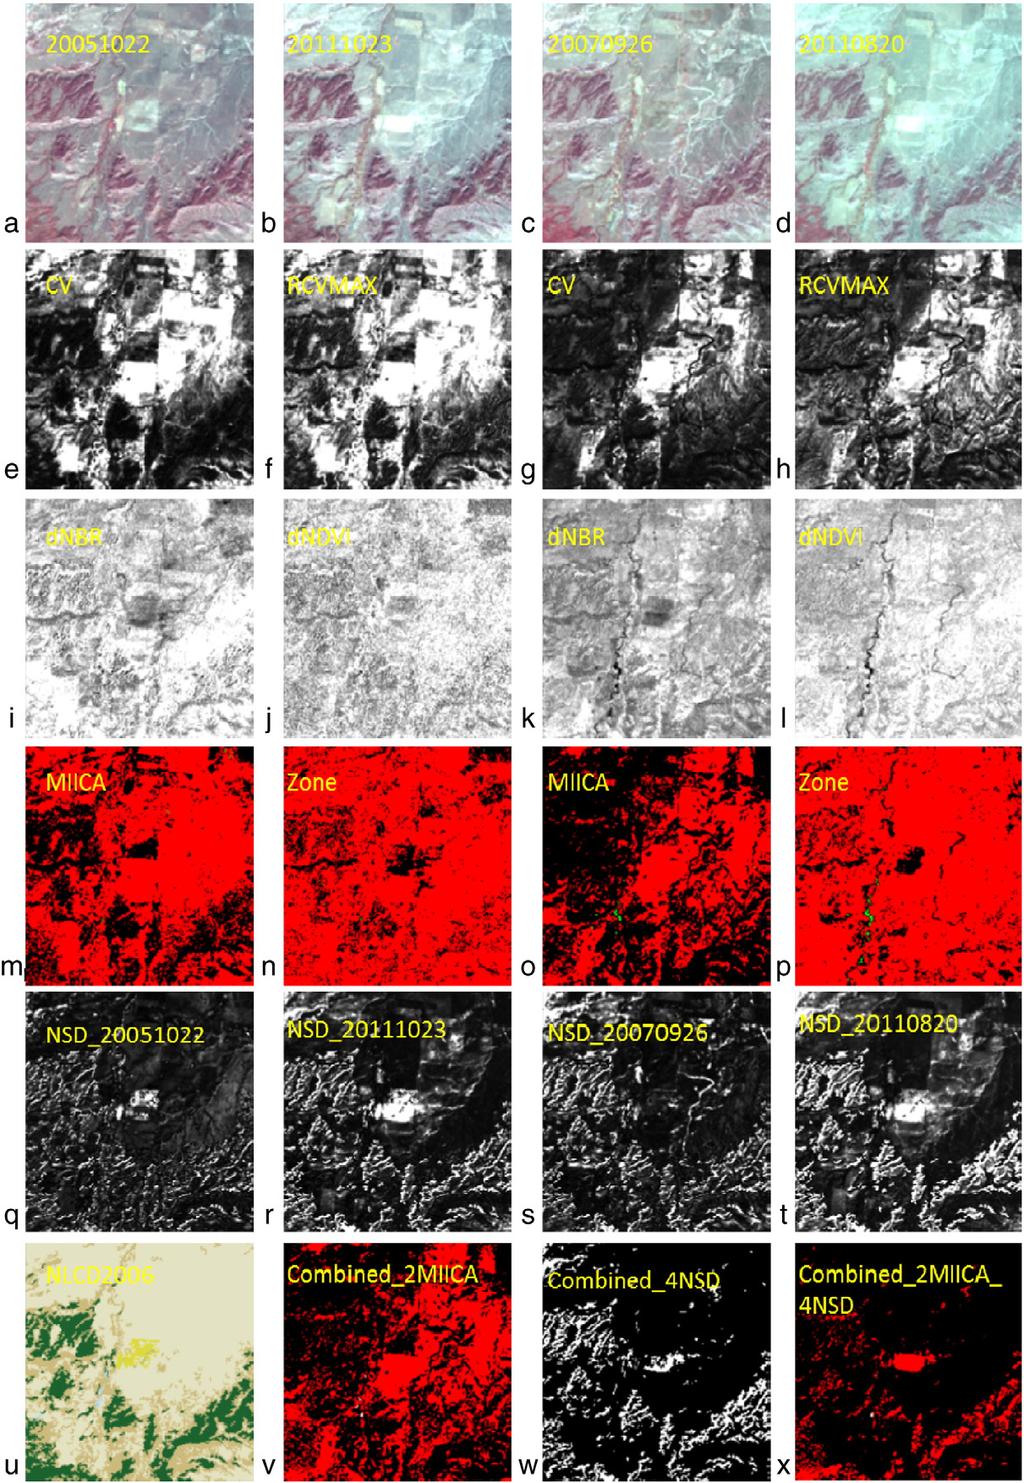 S. Jin et al. / Remote Sensing of Environment 132 (2013) 159 175 171 Fig. 11. The change detection procedure is demonstrated for a subset of p33r33. NLCD 2006 mapping for p22r39.